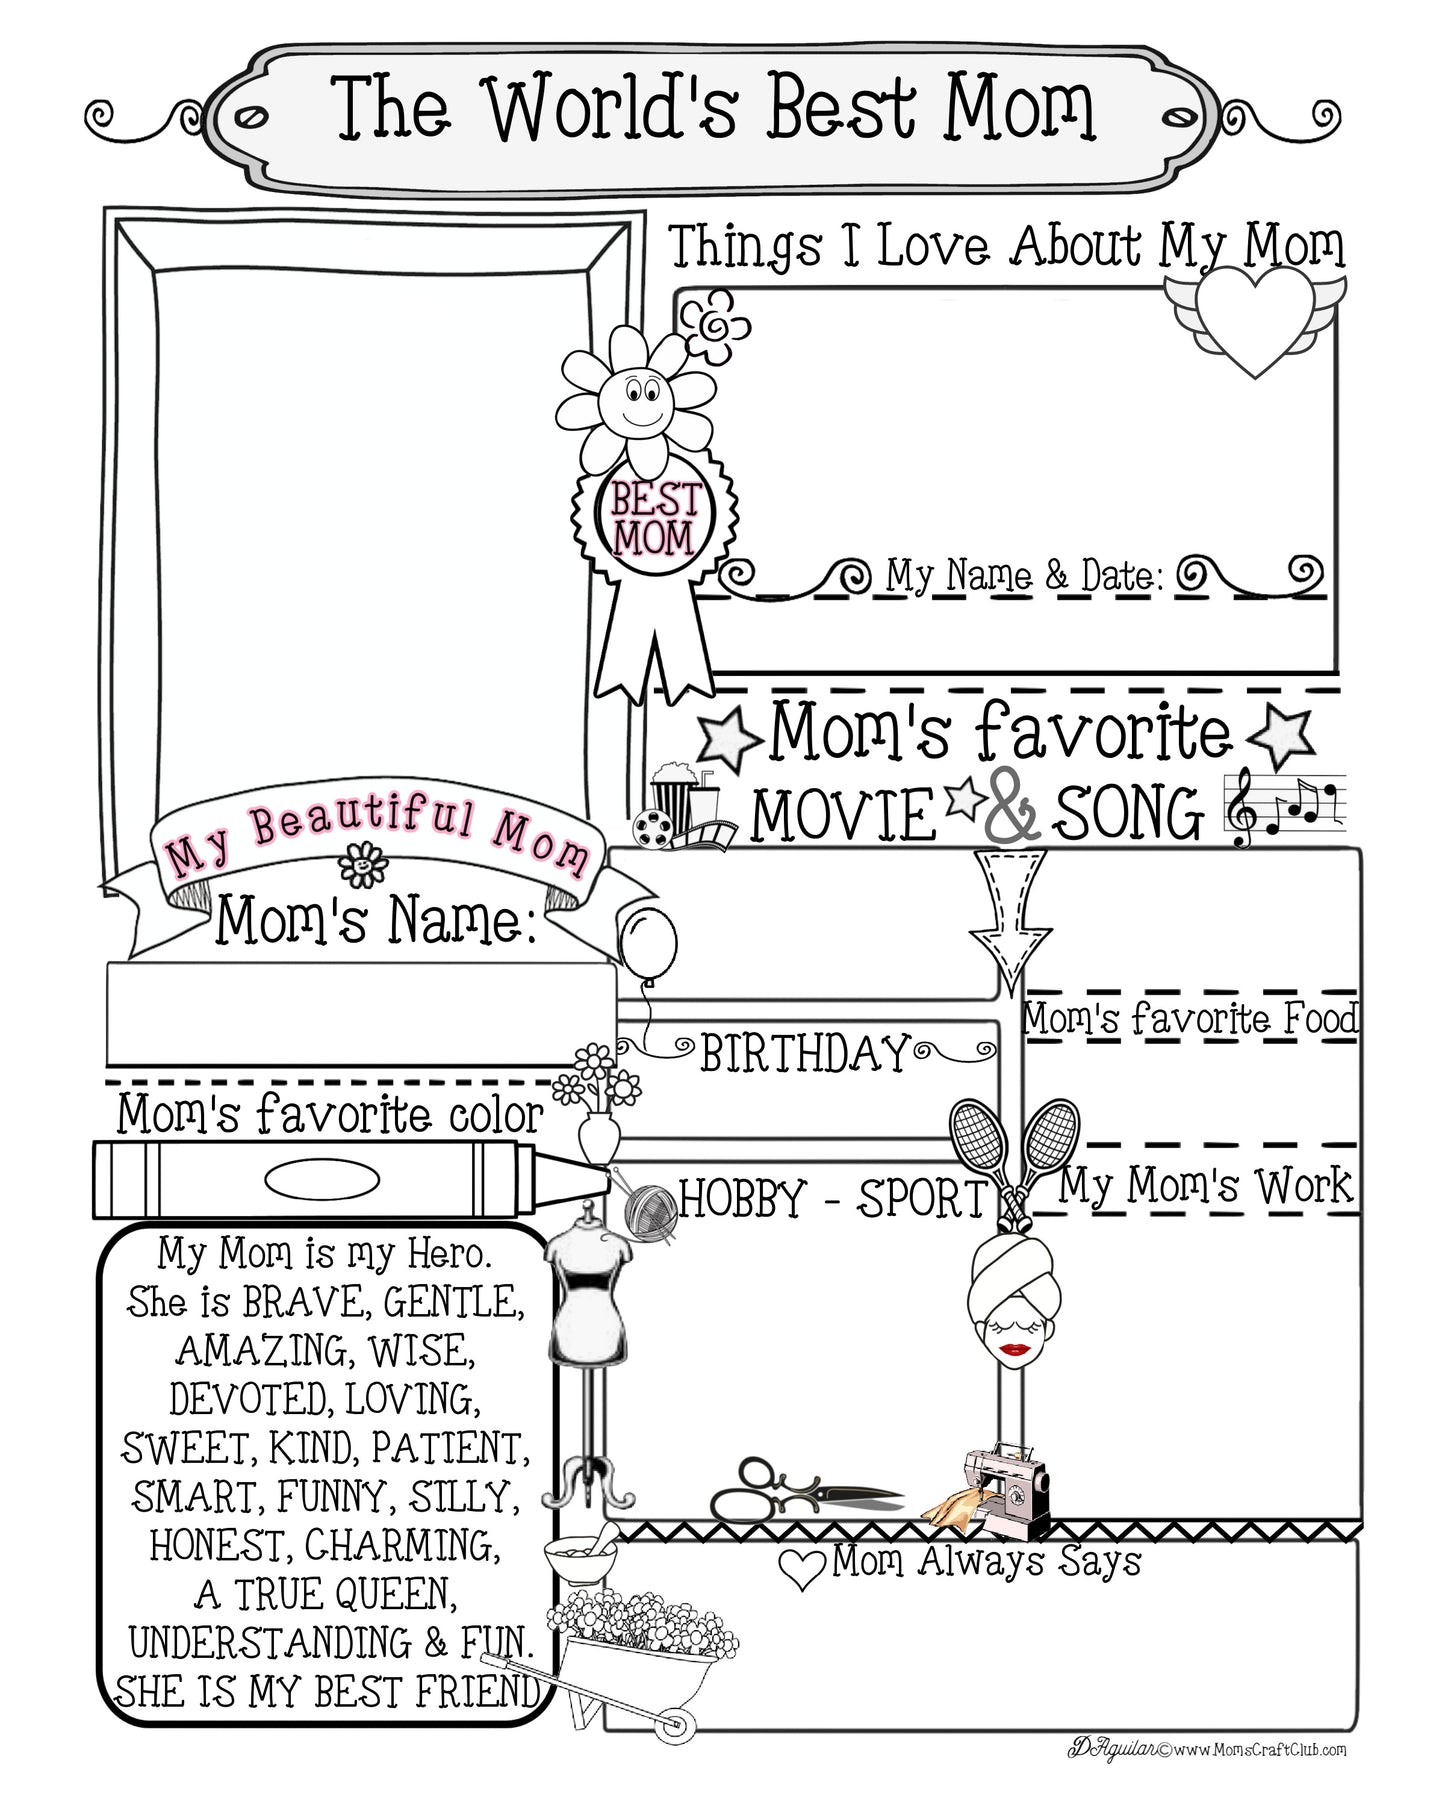 Best Mom - All About My Mom Coloring Page - Craft - Gift -8x10 Frame Ready